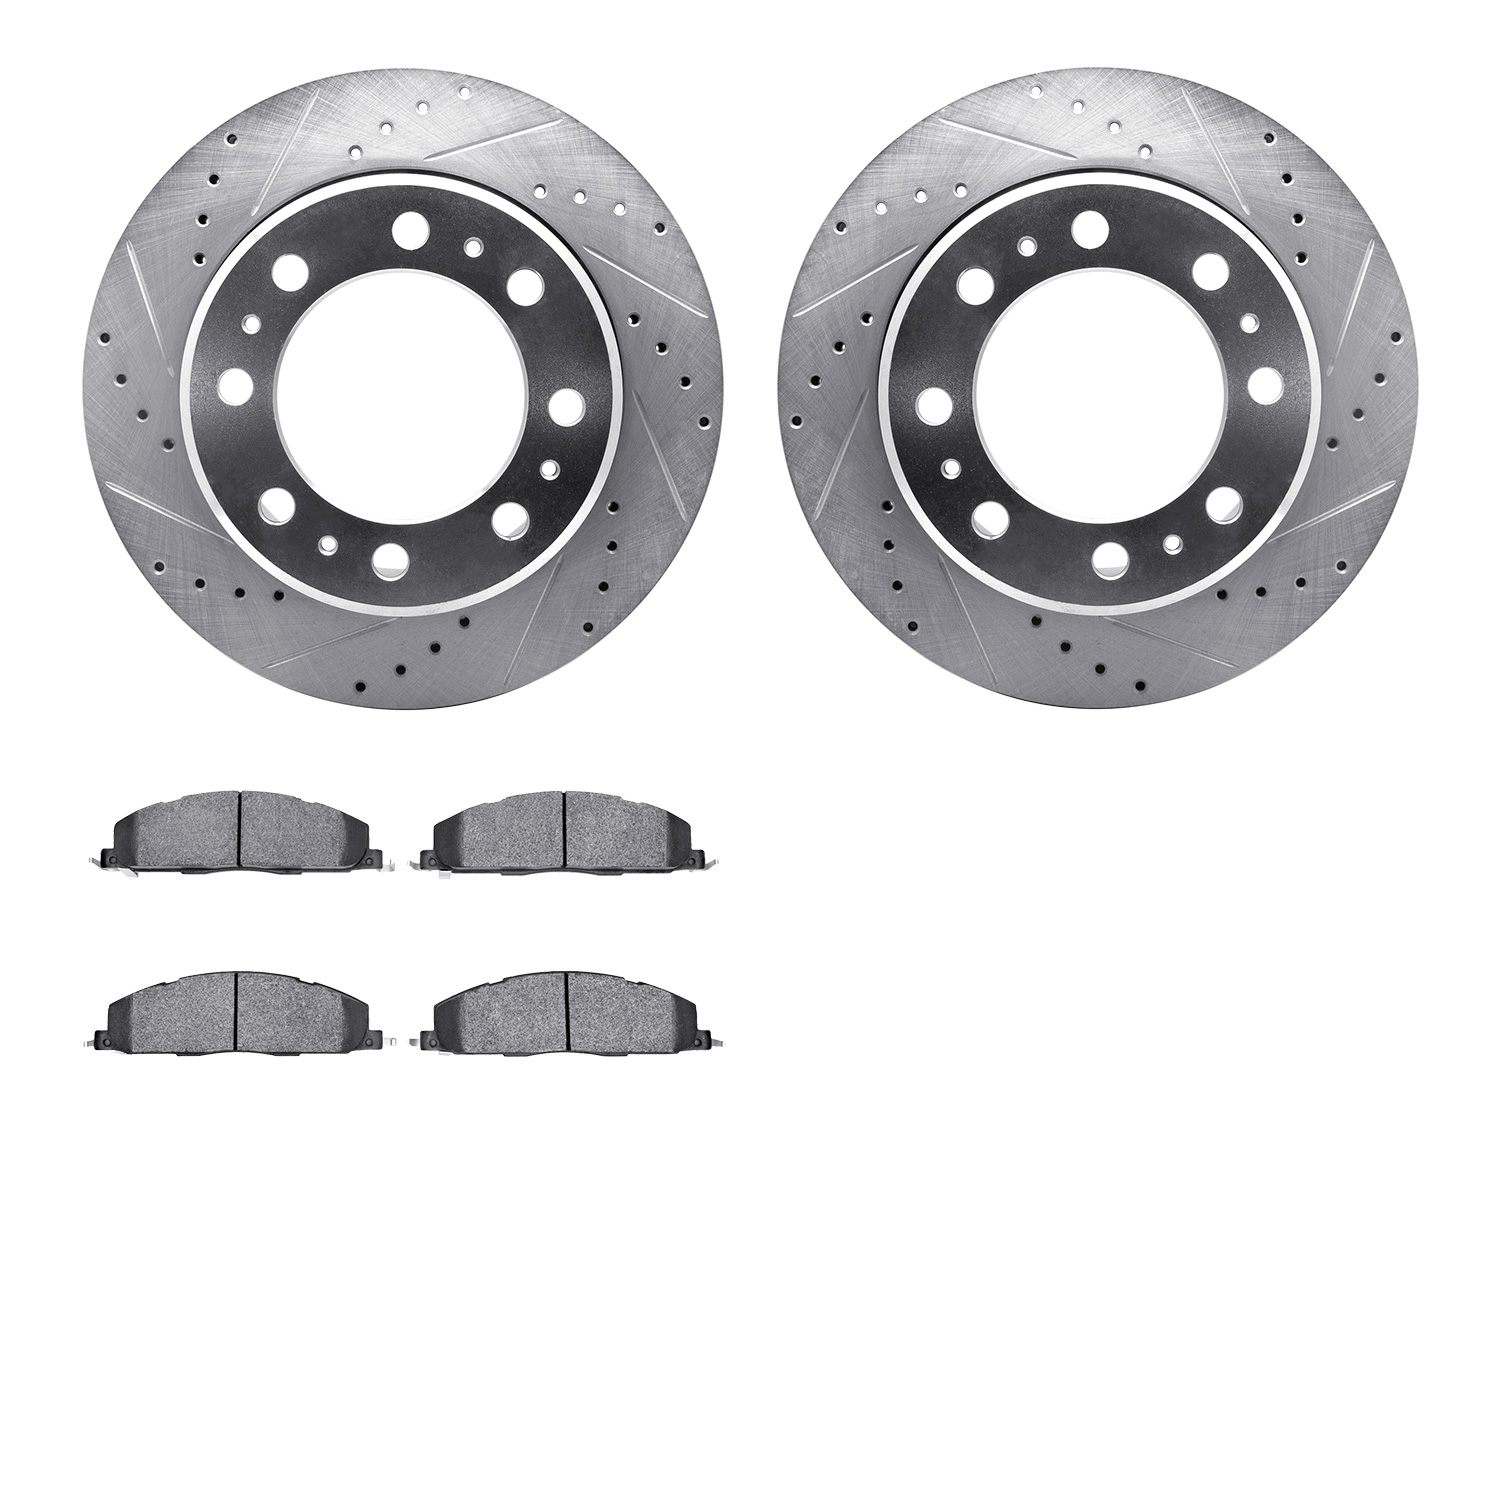 7402-40025 Drilled/Slotted Brake Rotors with Ultimate-Duty Brake Pads Kit [Silver], 2009-2018 Mopar, Position: Rear